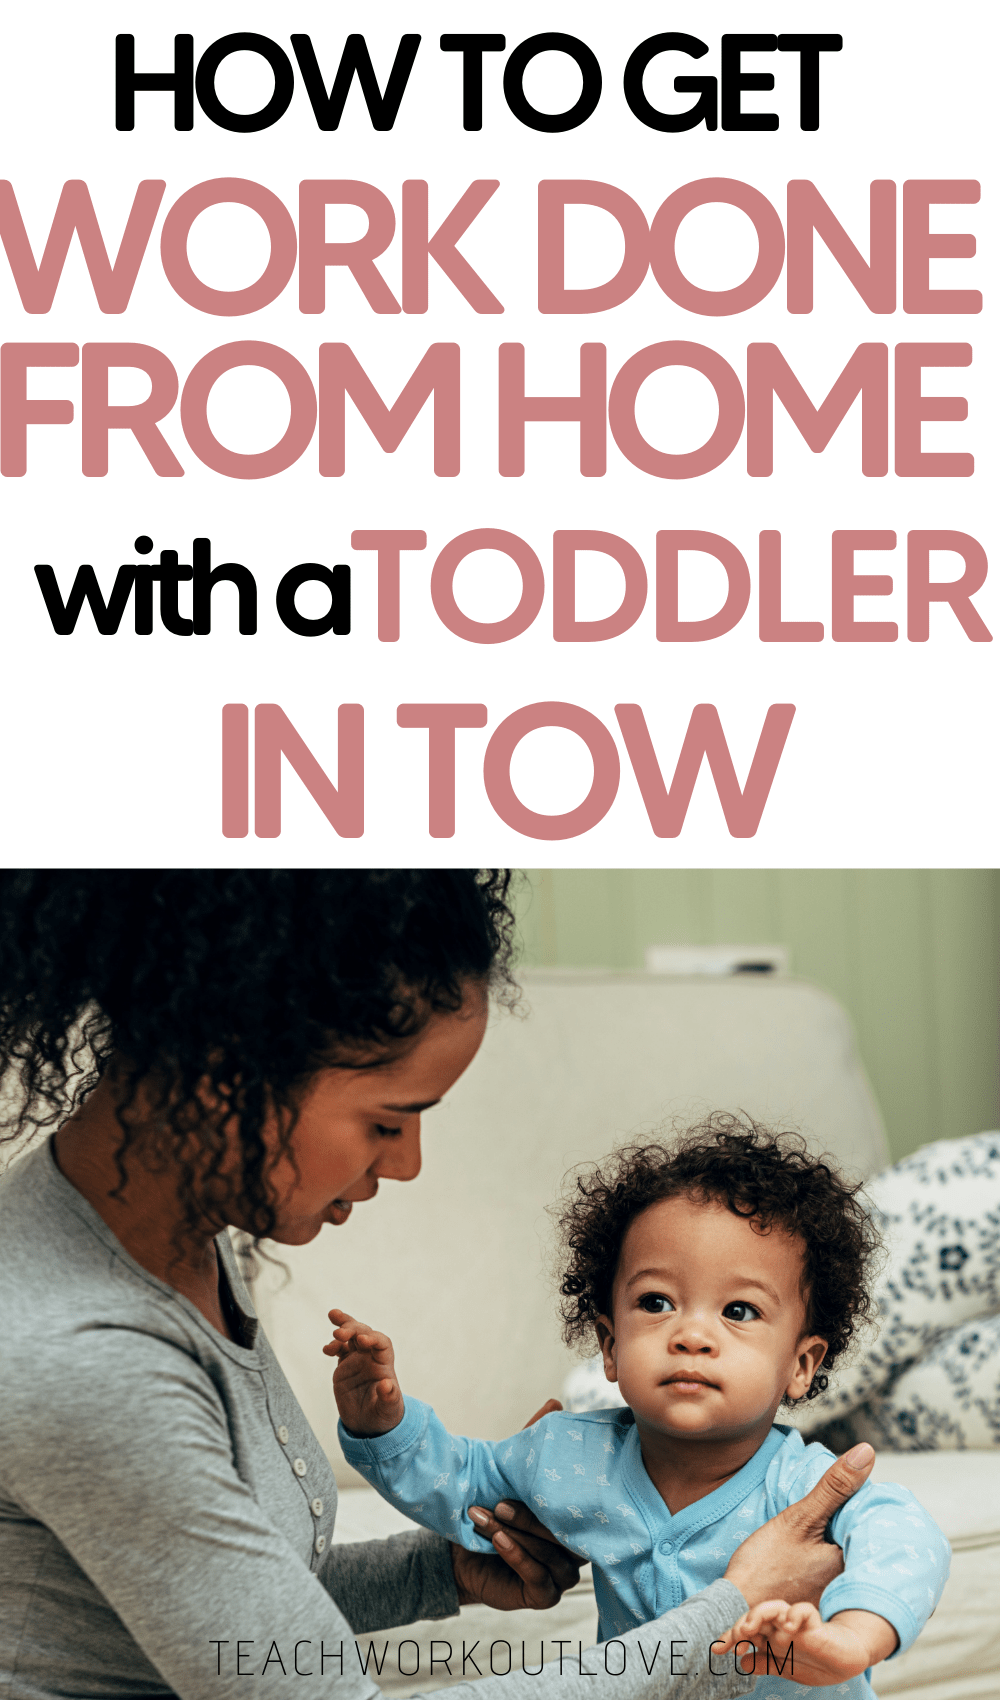 Learning to juggle home life, work life, and mom life is a big struggle for many right now. Here's how to get work done at home with toddler.